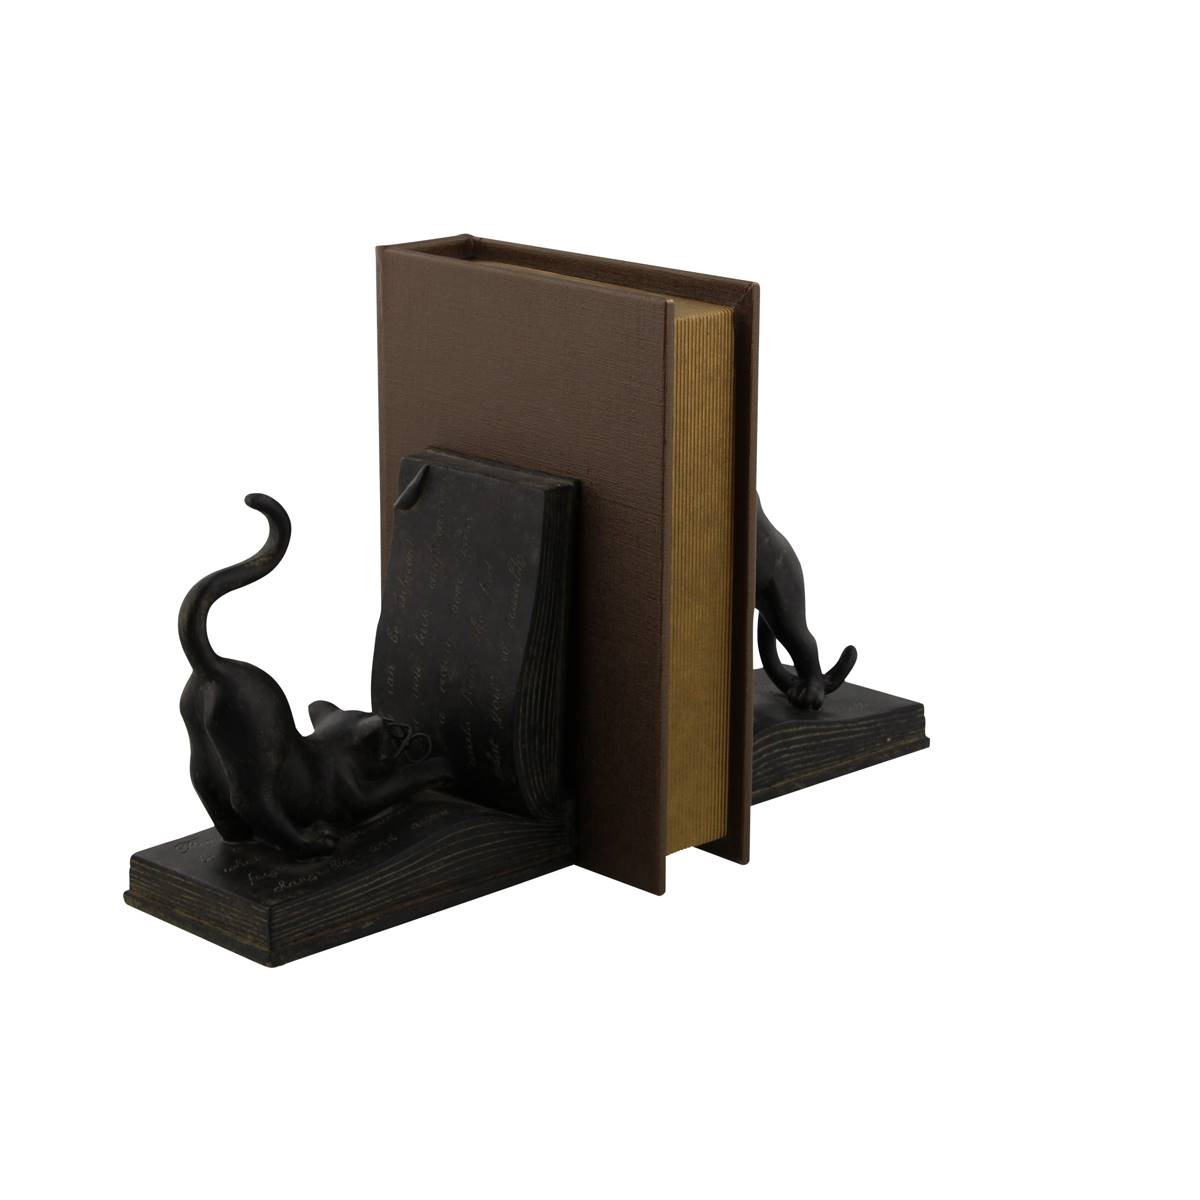 9th & Pike(R) Rustic Book And Cat Bookend Pair